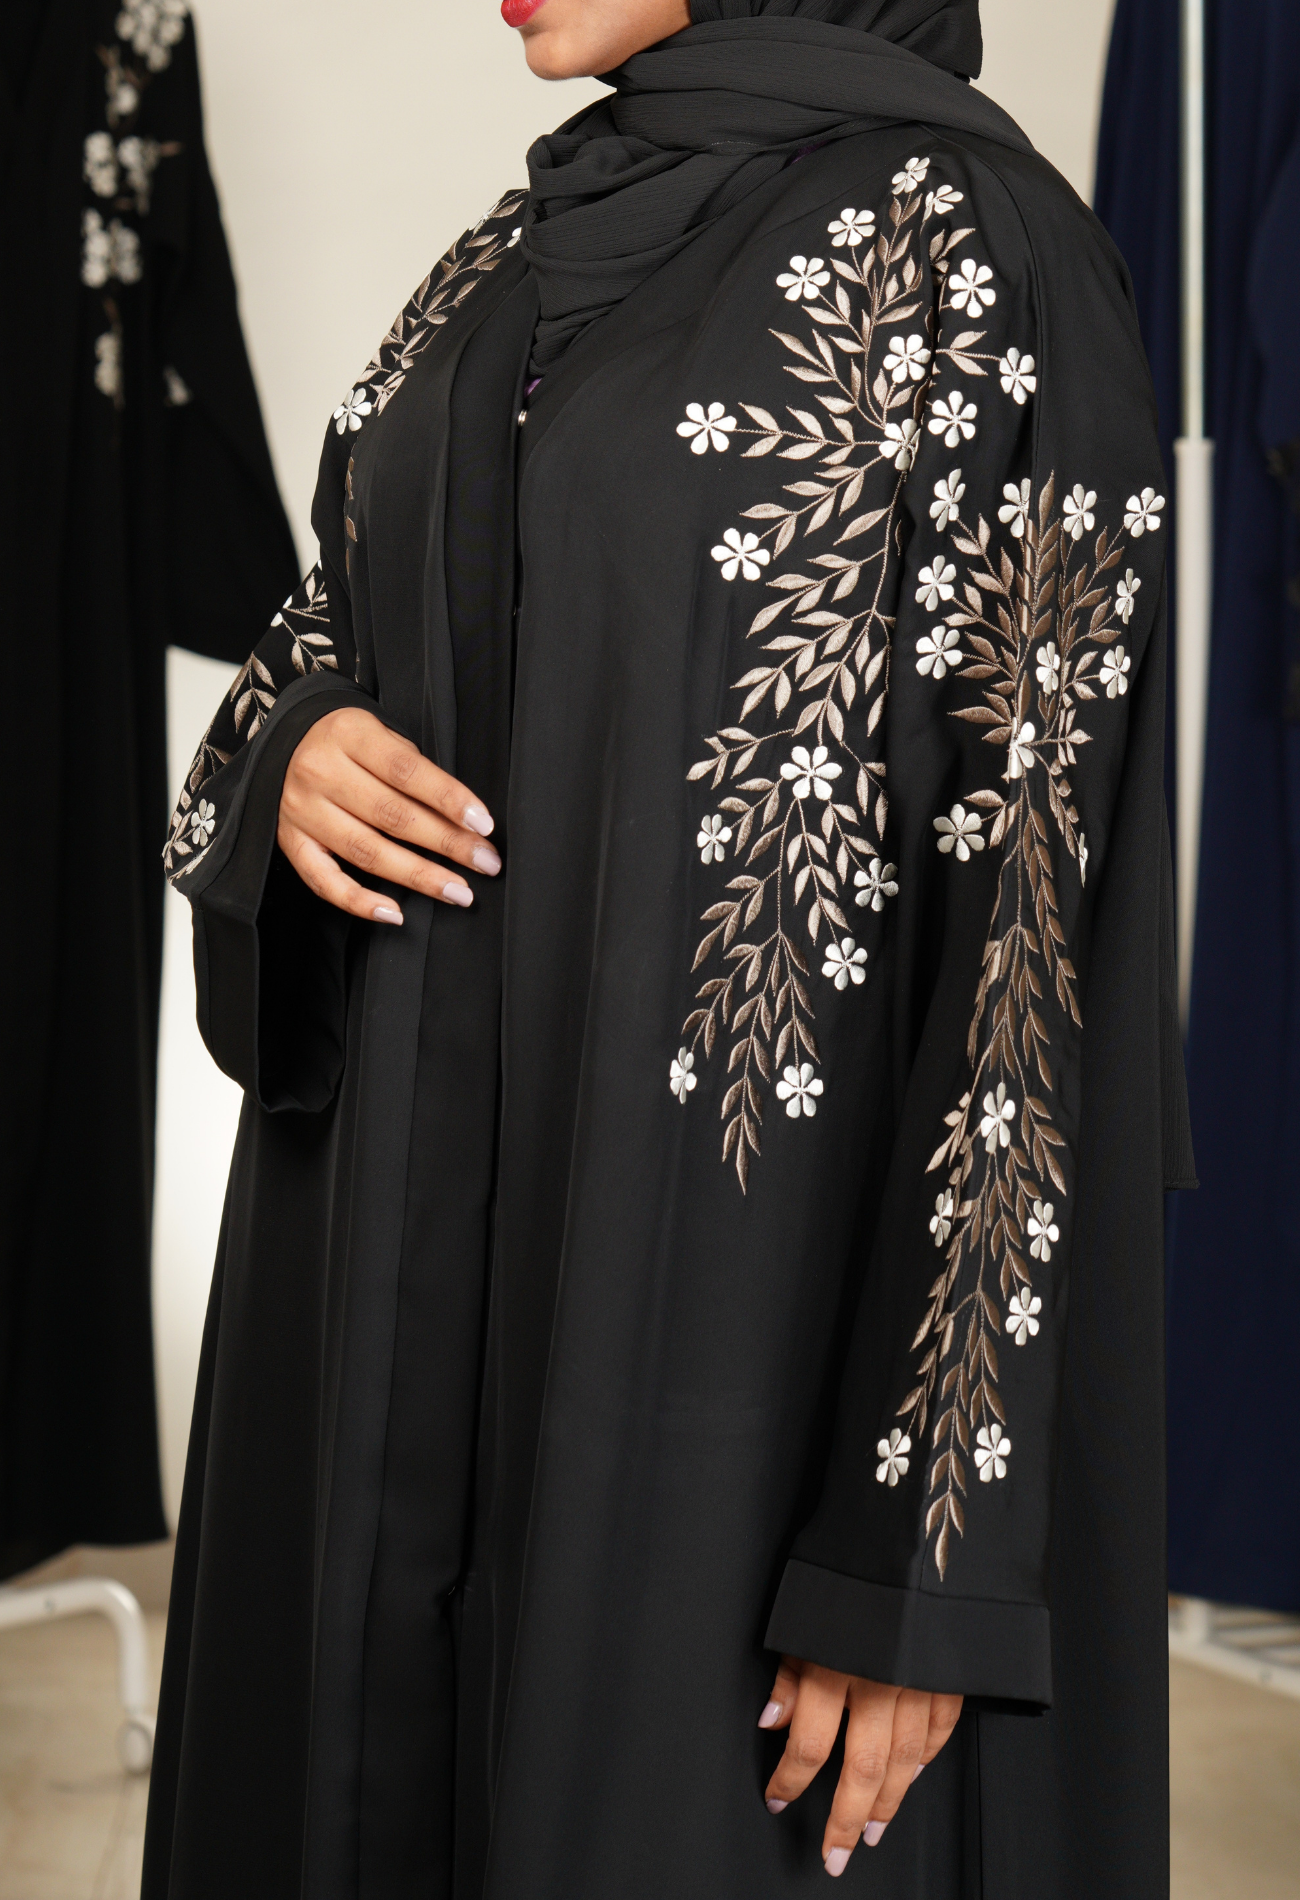 Black Front Open Abaya With Embroidery On Sleeves